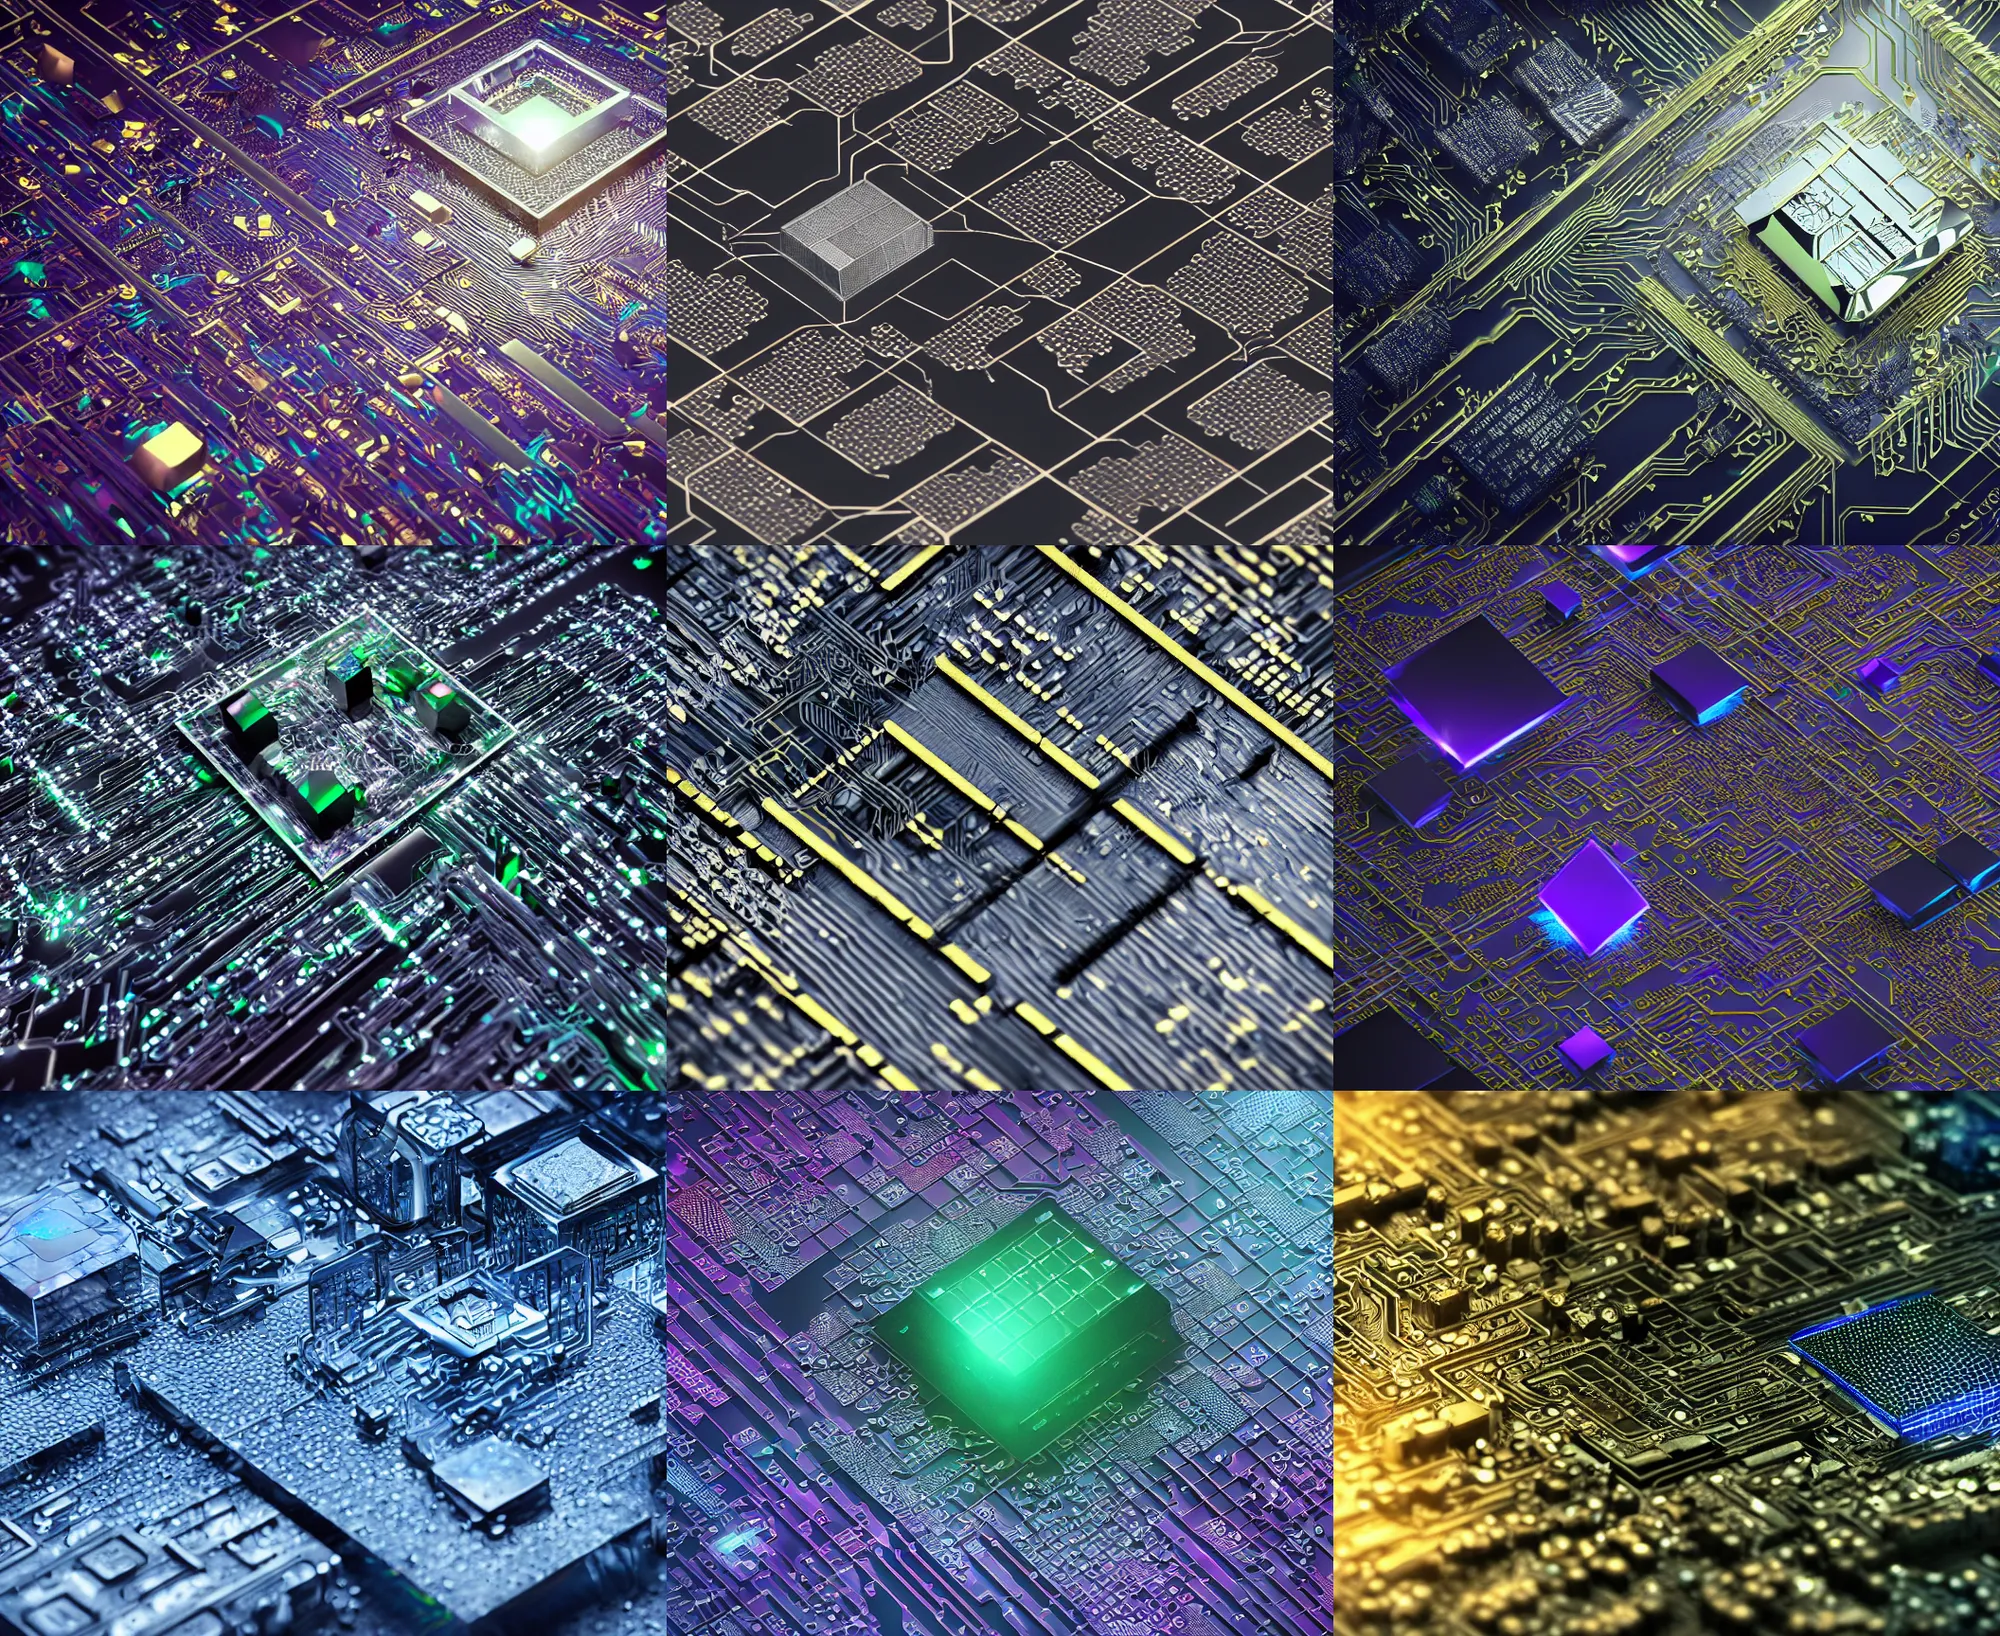 Prompt: circuit board processor block, 3 d ray - traced photorealistic concept render, moody beautiful colors, futuristic, squares, crystal nodes, sleek, shiny, high angle shot with sharp realistic intricate detail, iridescent glowing chips, black 3 d cuboid device, modular graphene, futuristic precious metals, treasure artifact